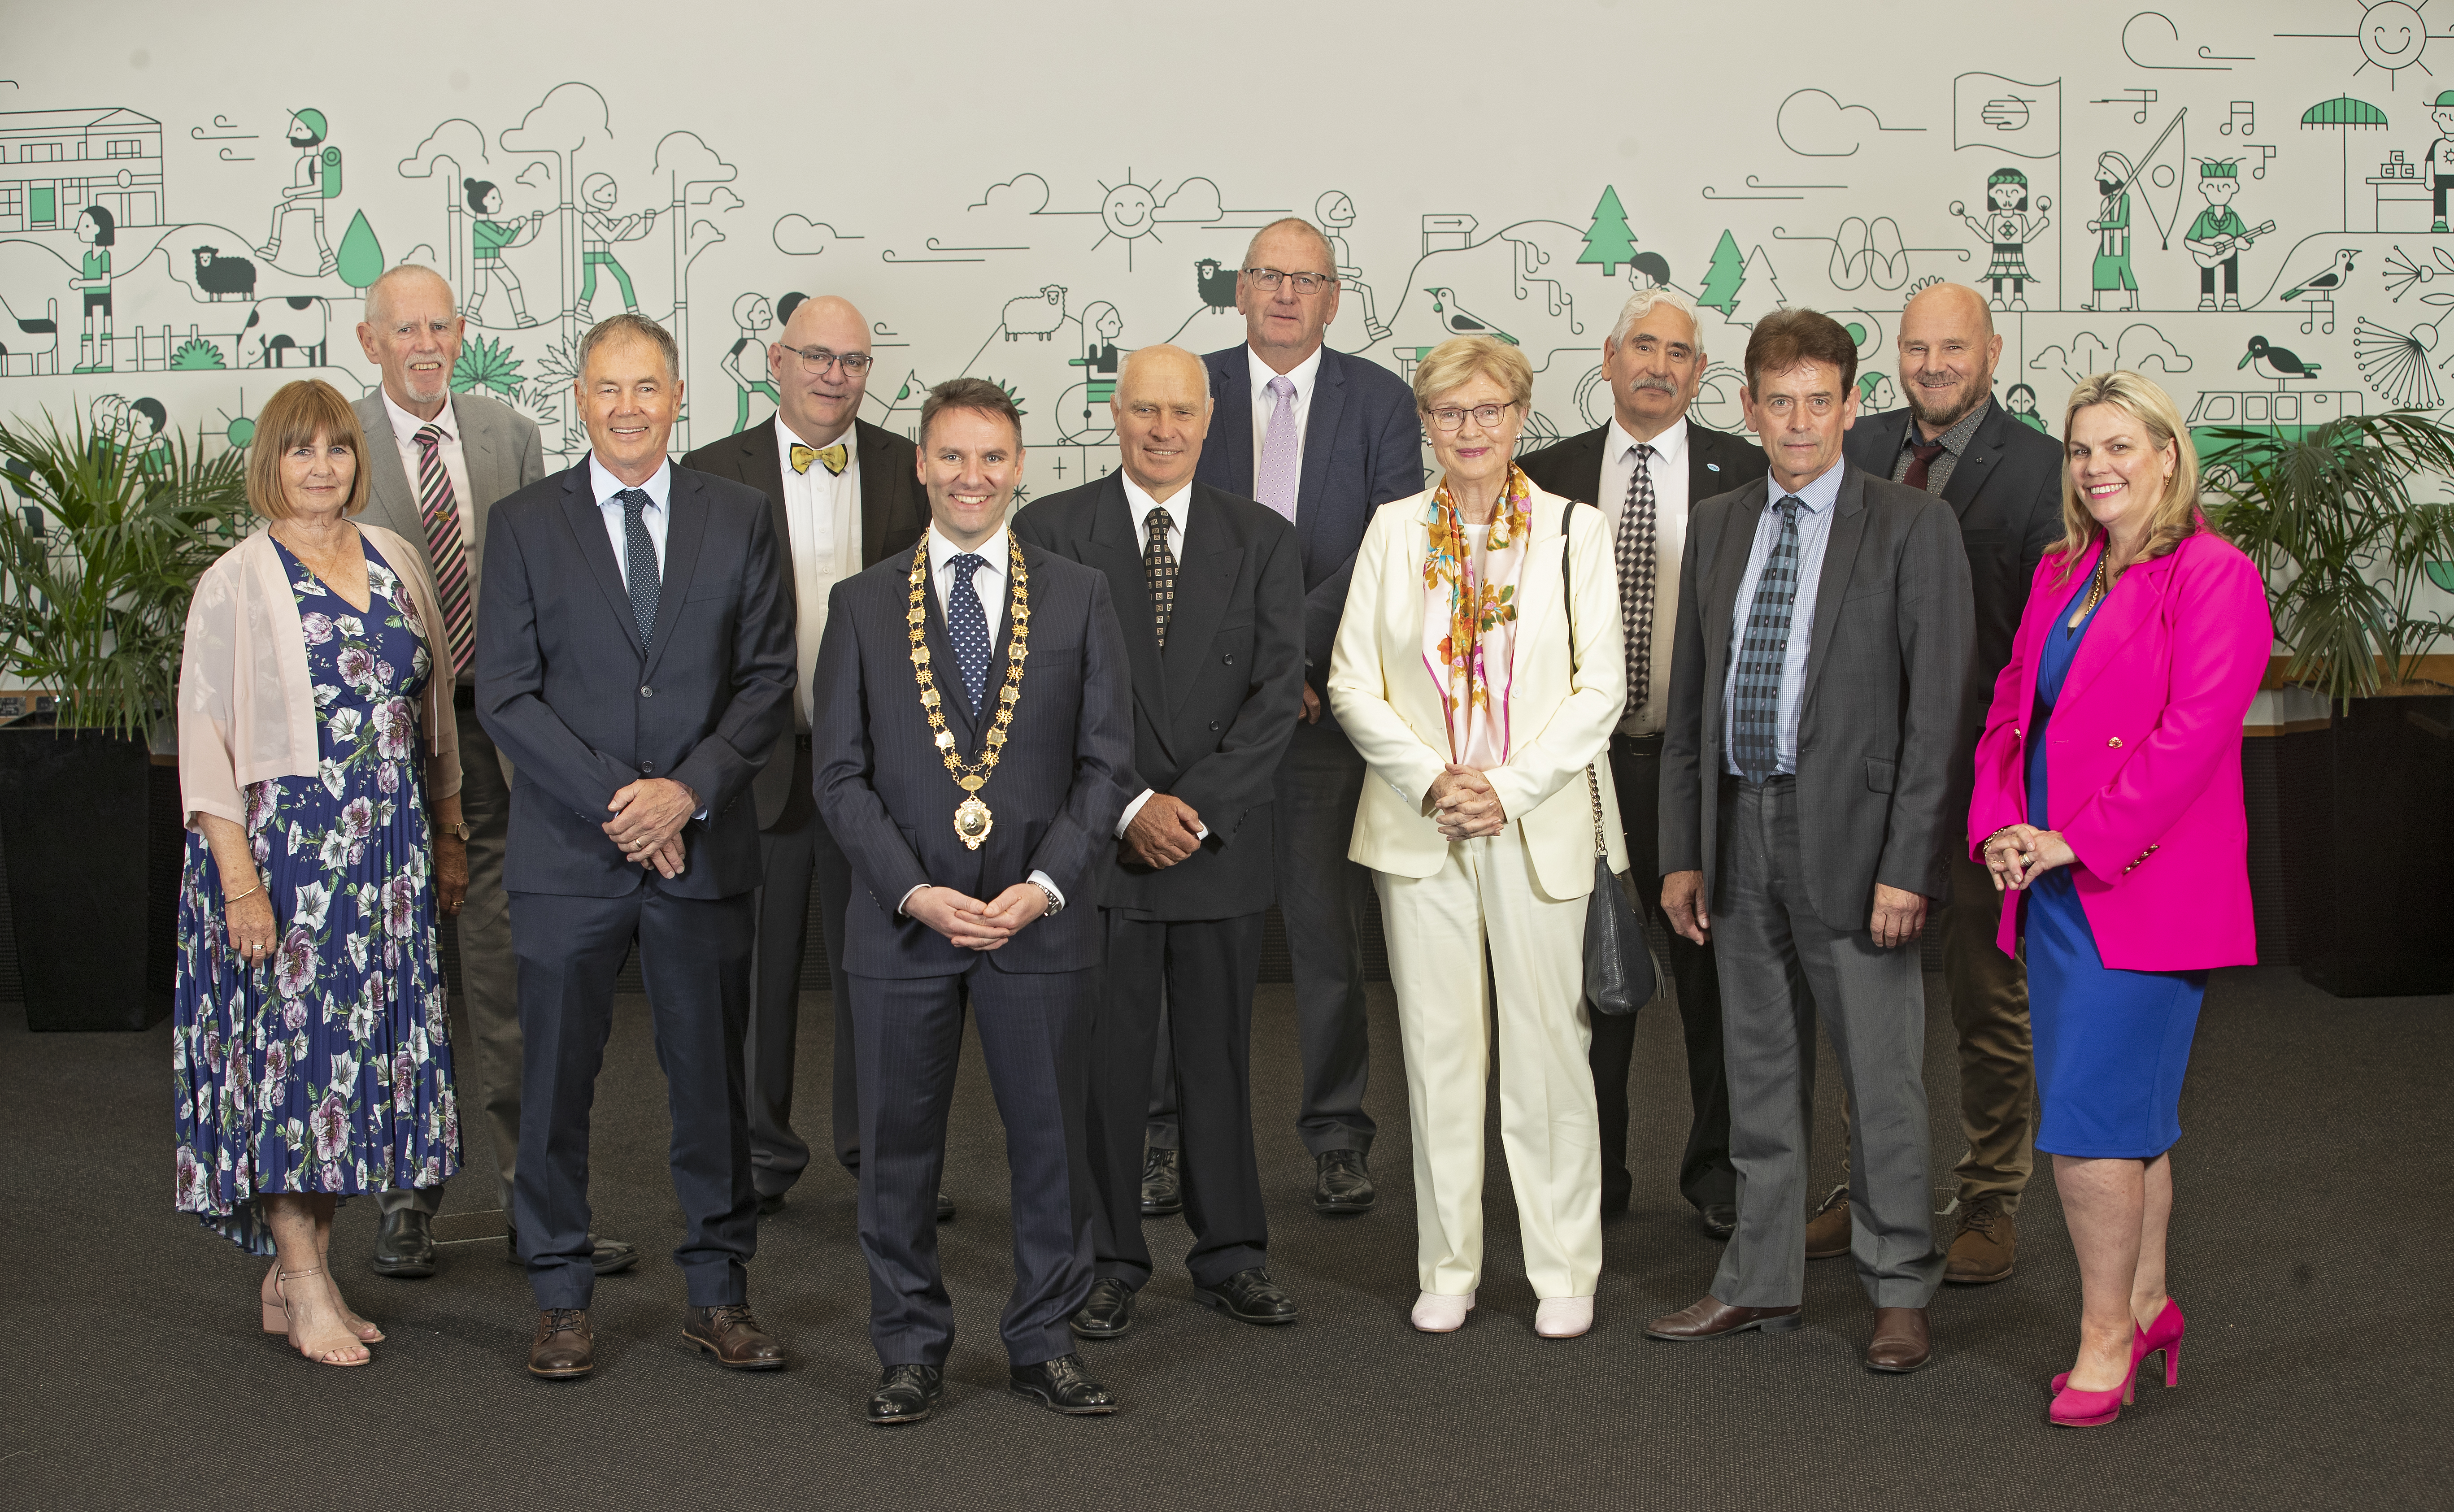 Western Bay of Plenty District Councillors for the 2022-25 triennium (left to right): Anne Henry, Murray Grainger, Richard Crawford, Rodney Joyce, Mayor James Denyer, Deputy Mayor John Scrimgeour, Don Thwaites, Margaret Murray-Benge, Allan Sole, Grant Dally, Andy Wichers, Tracey Coxhead.